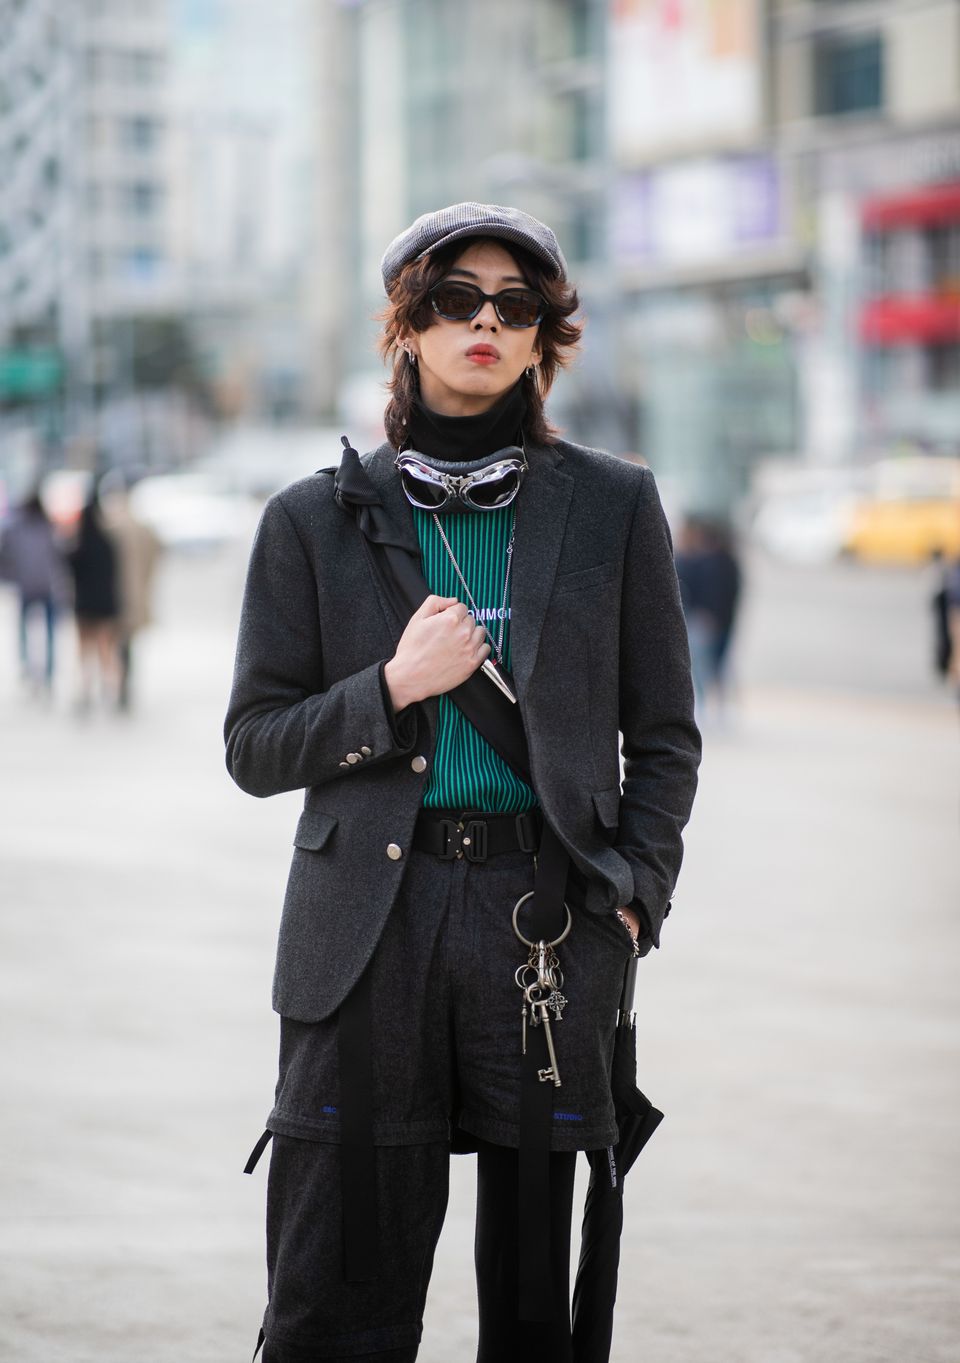 Seoul Street Style Photos Will Seriously Inspire You To Up Your Fashion Game Huffpost Uk Style 3728